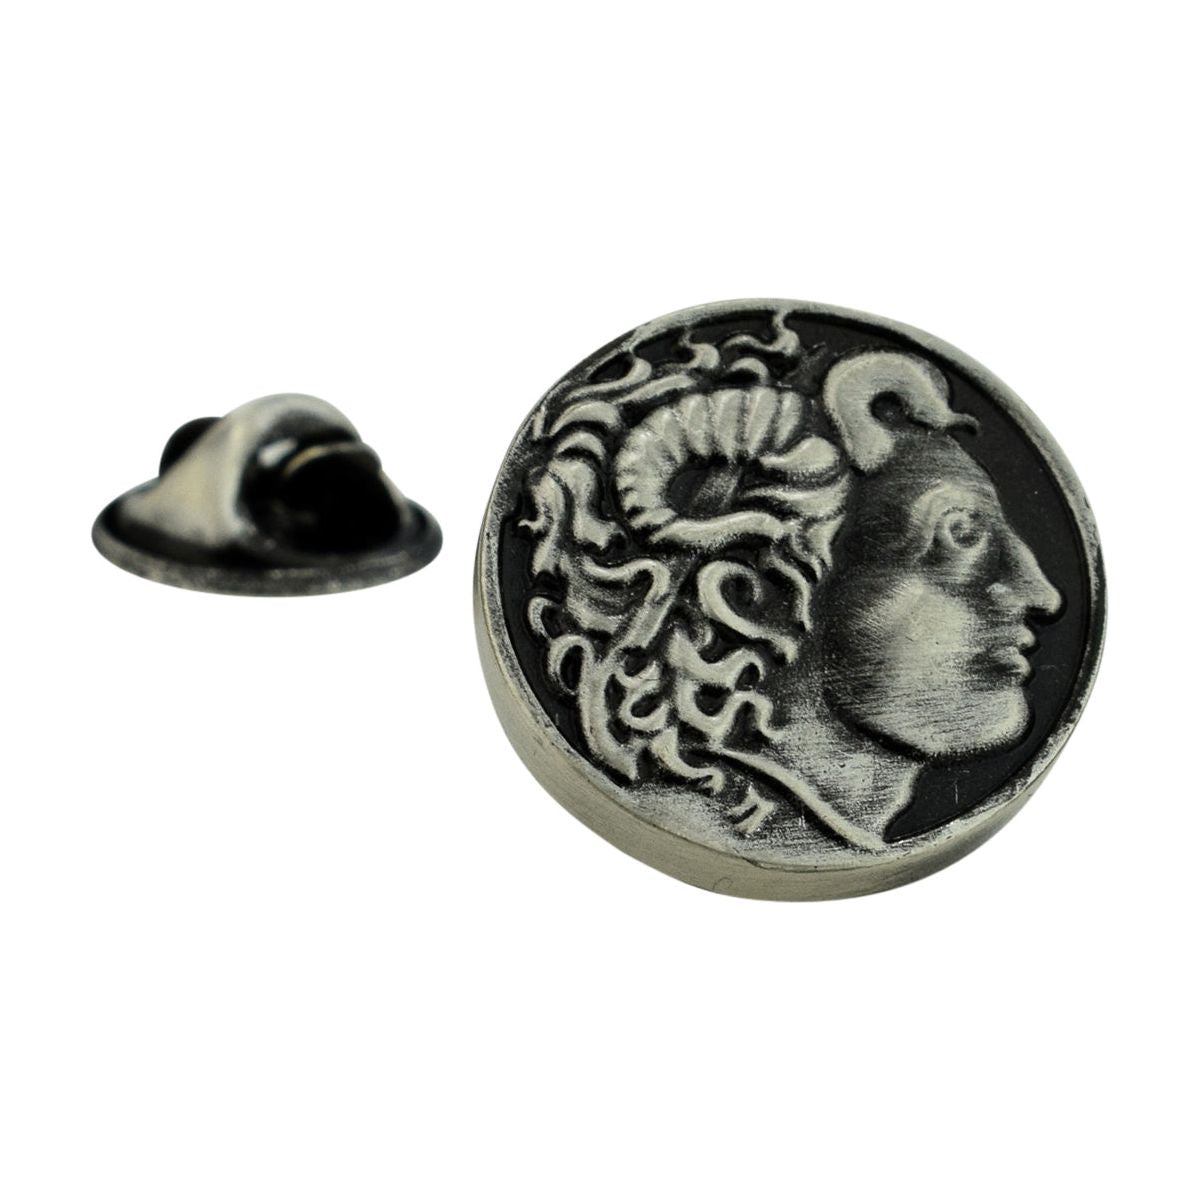 Alexander the Great Lapel Pin Badge - Ashton and Finch